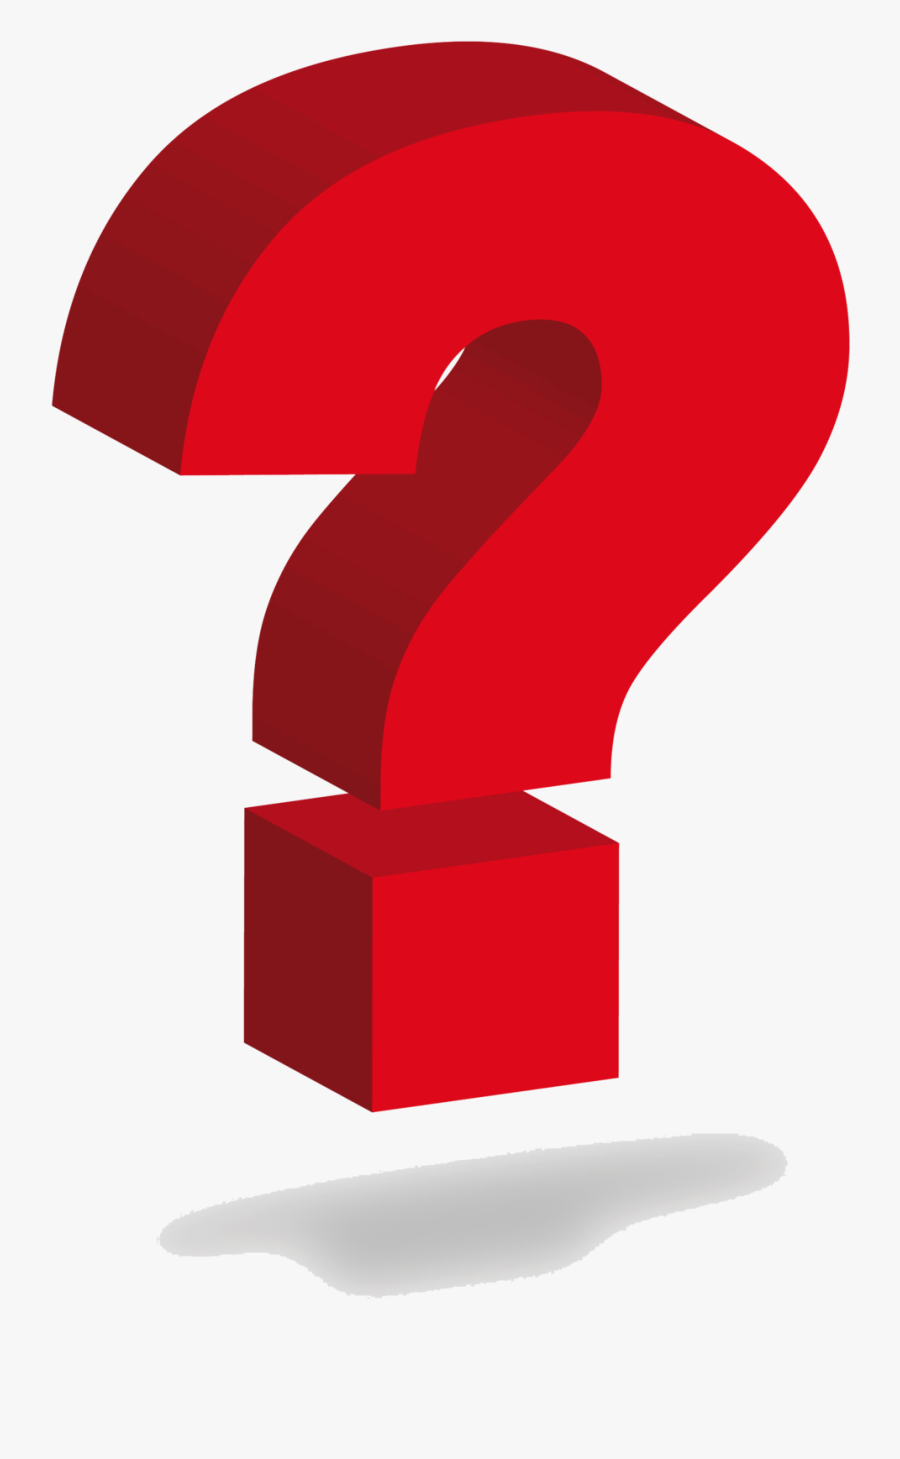 Microsoft Clipart Any Question - Question Mark Animation Png, Transparent Clipart